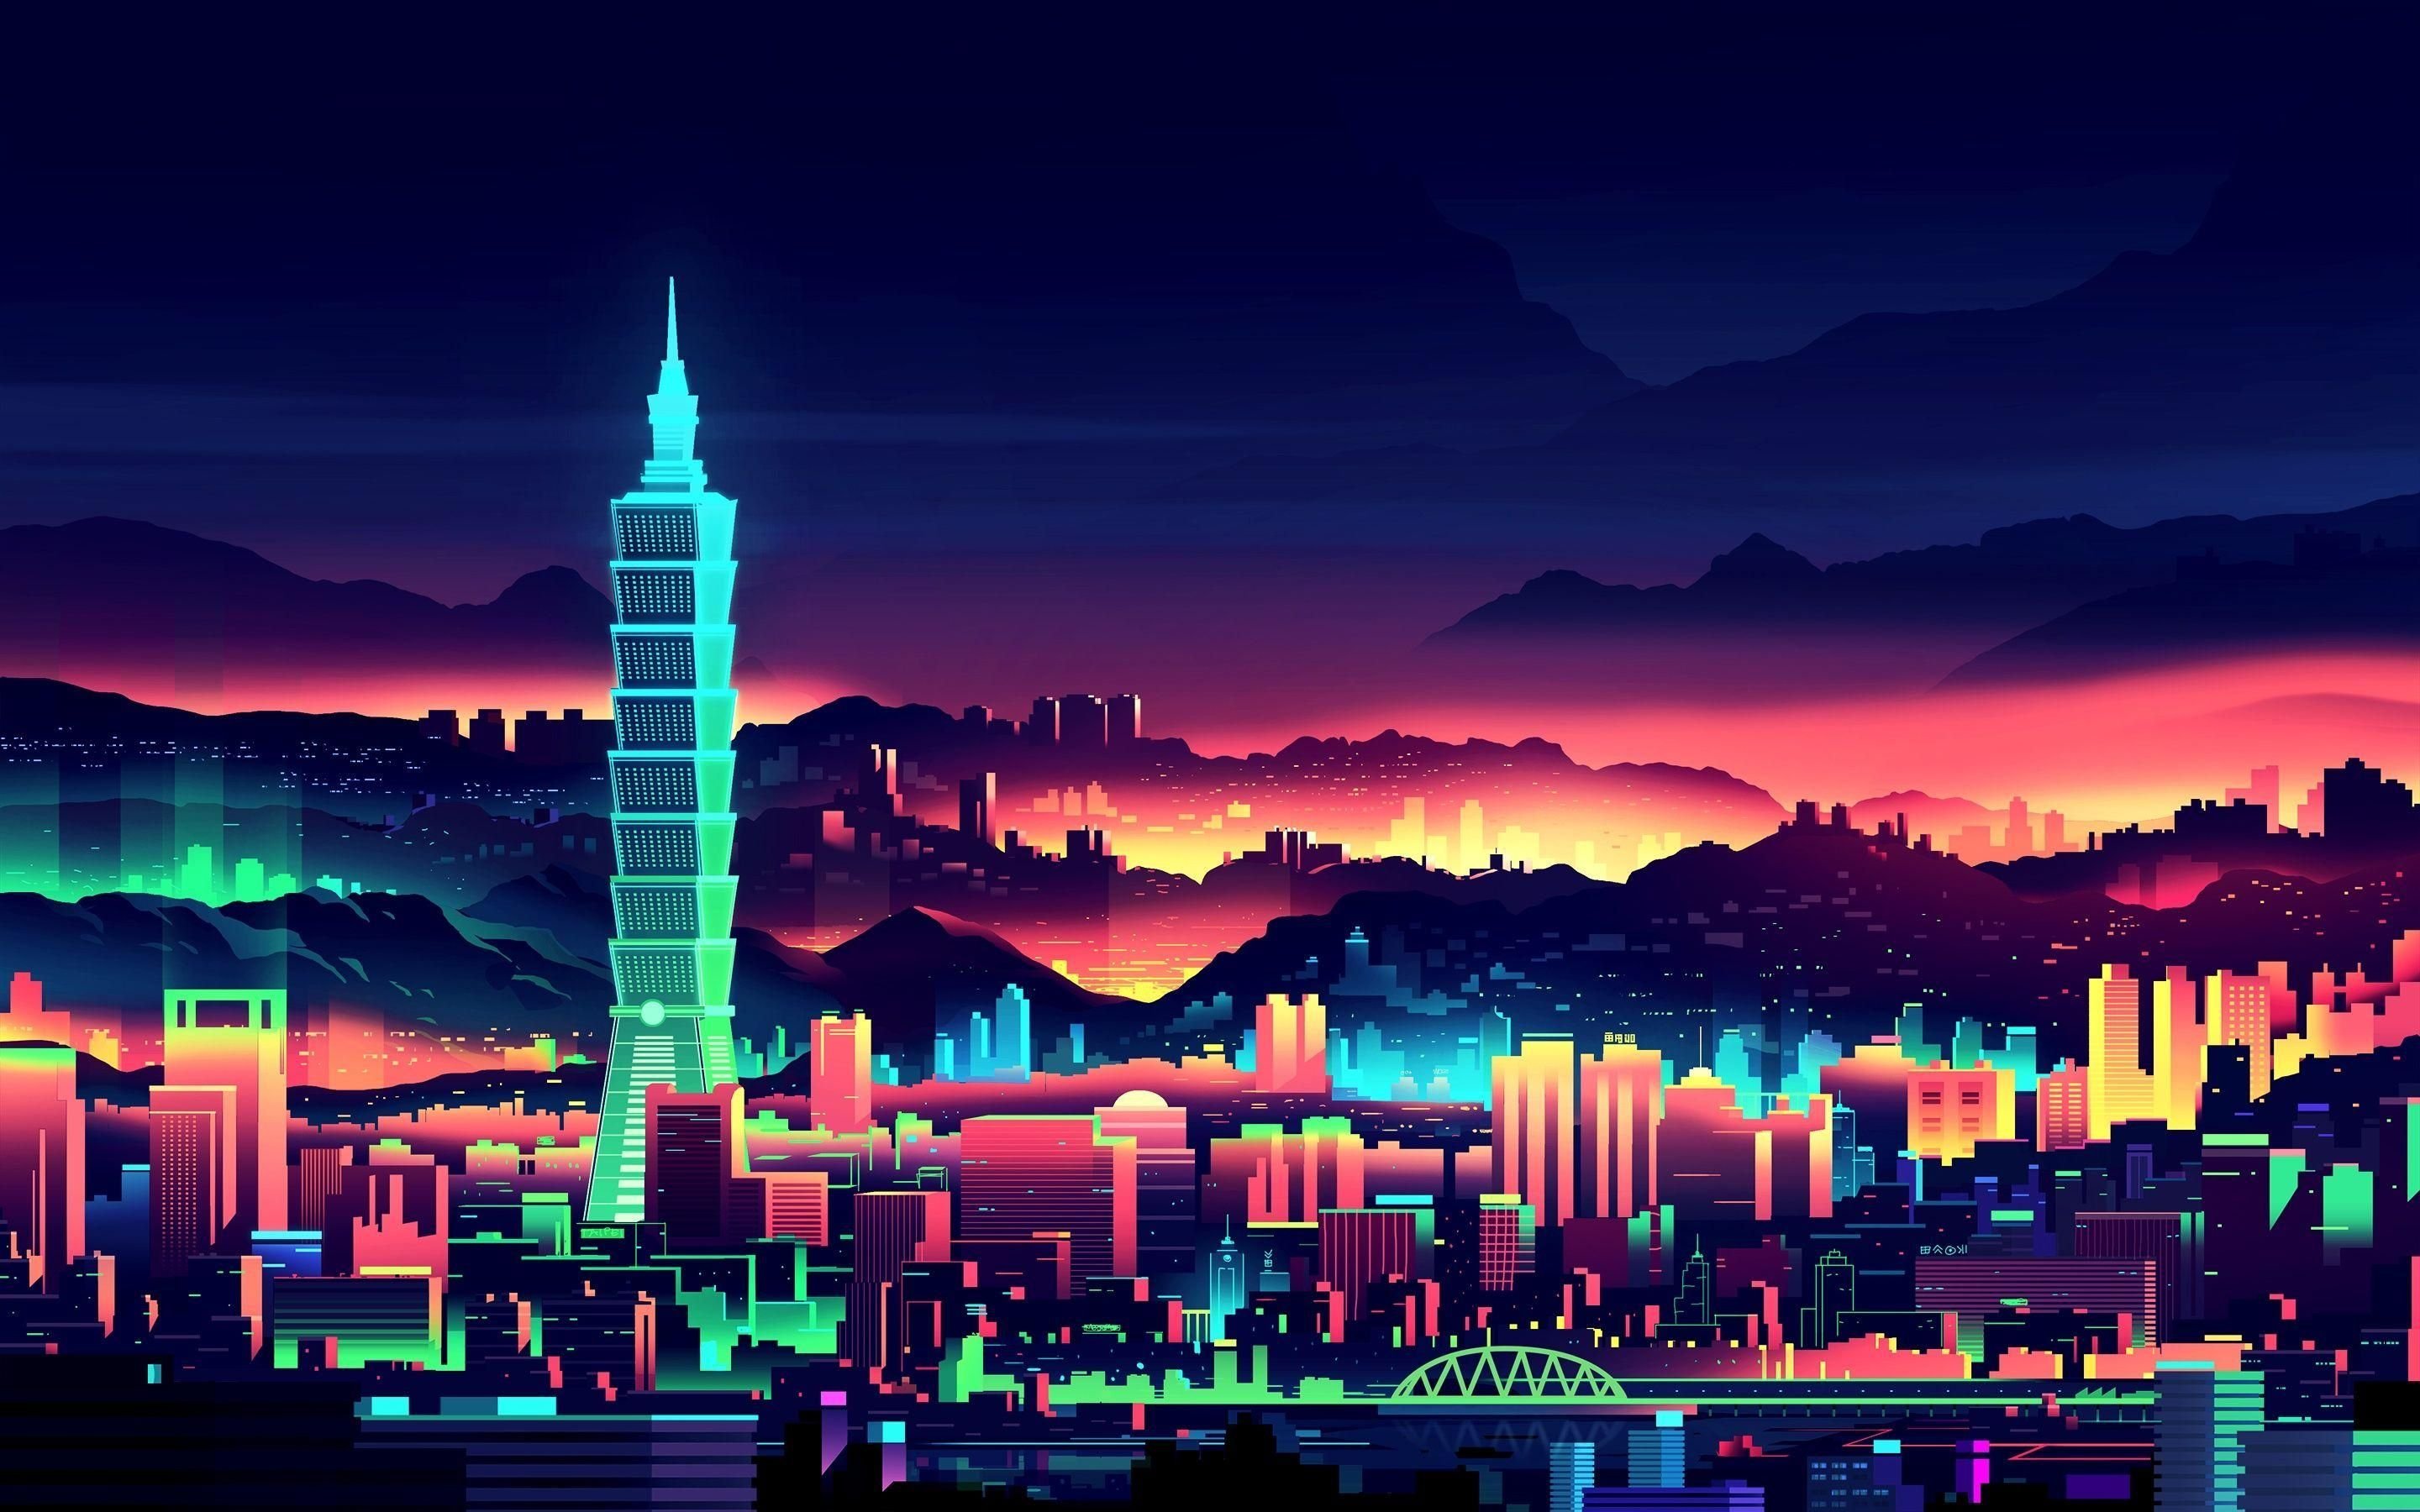 city wallpapers, photos and desktop backgrounds up to 8K 7680x4320 resolution